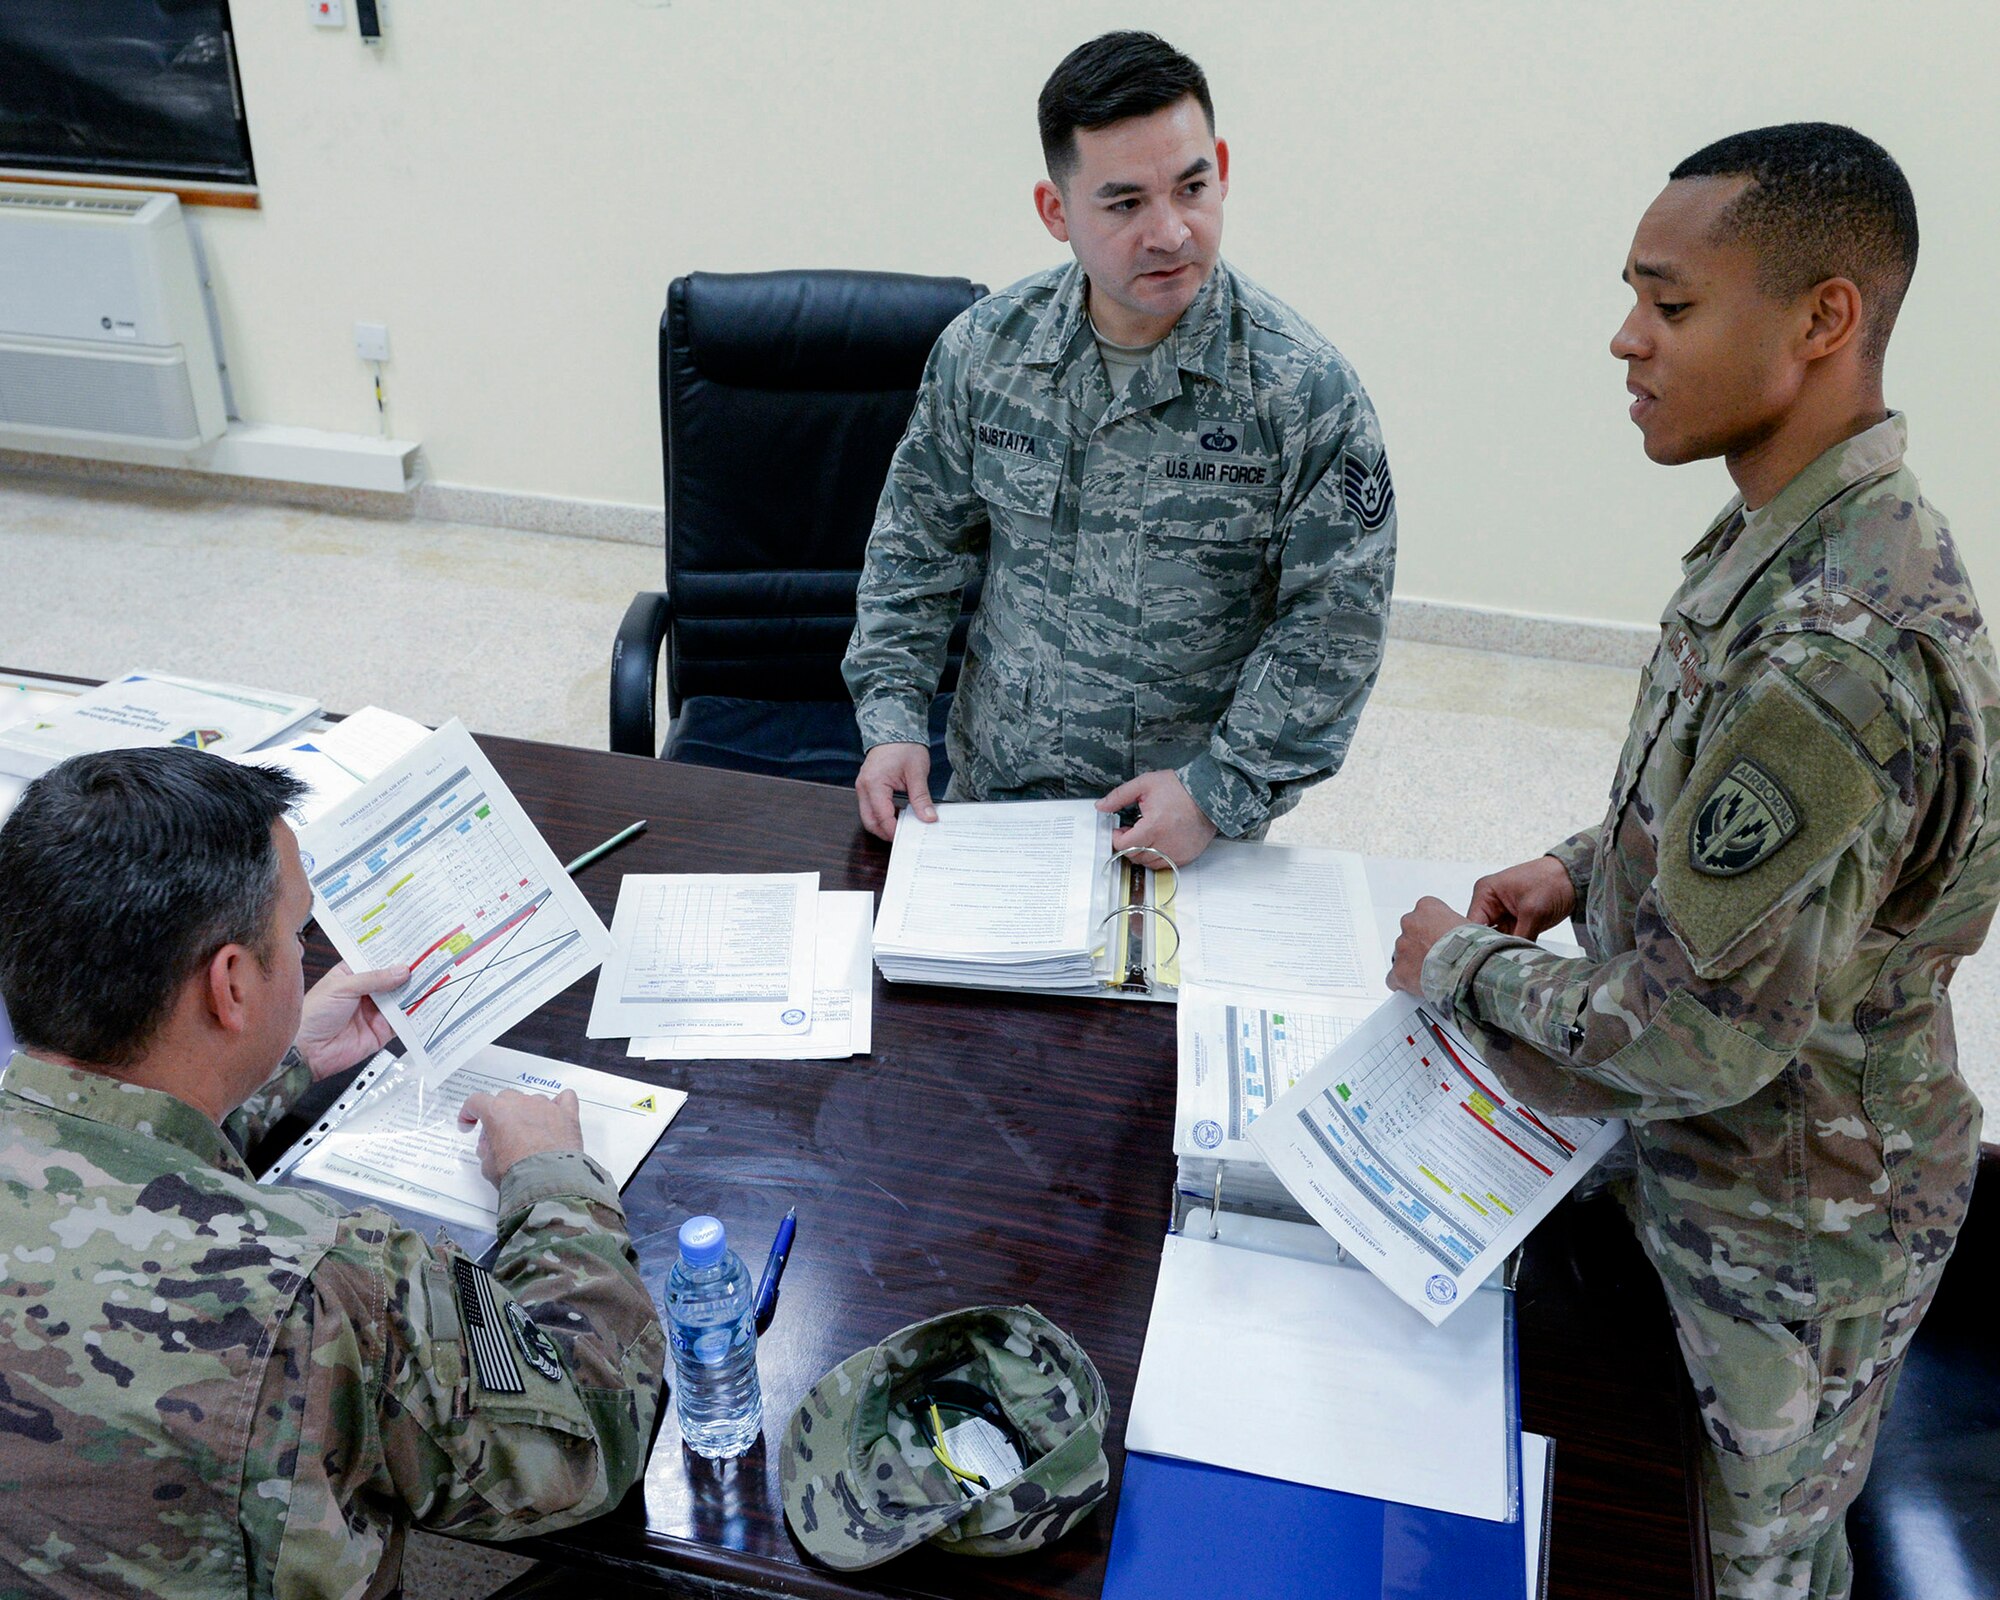 U.S. Air Force Tech. Sgt. Santino Sustaita, airfield driving program manager assigned to the 379th Expeditionary Office of Strategic Services, center, reviews training material with airfield driving trainers at Al Udeid, Air Force Base, Qatar, June 7, 2017. Airfield Management oversees more than 20 million square feet of airfield at Al Udeid in addition to overseeing the airfield driving program and filing all flight plans for flights arriving to and departing from the base. (U.S. Air National Guard photo by Tech. Sgt. Bradly A. Schneider/Released)